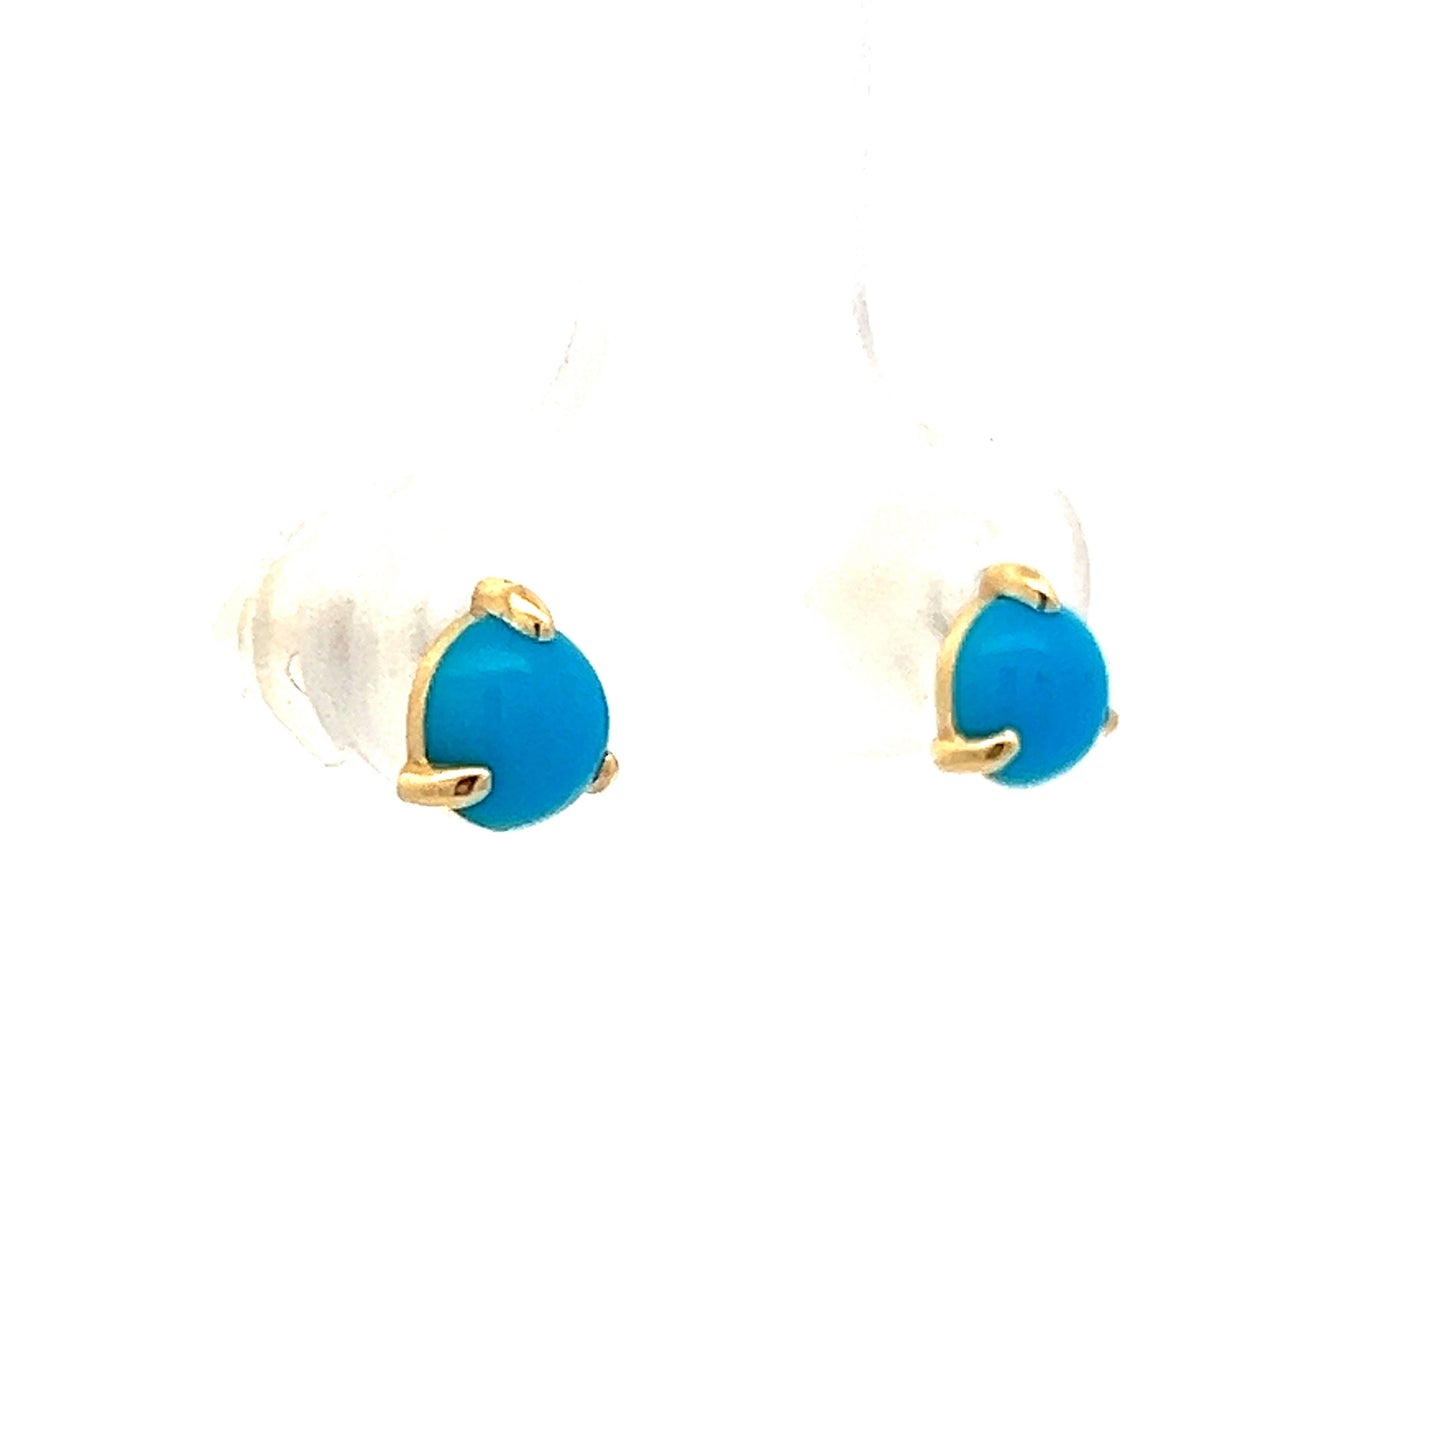 Turquoise Stud Earrings in 14k Yellow Gold